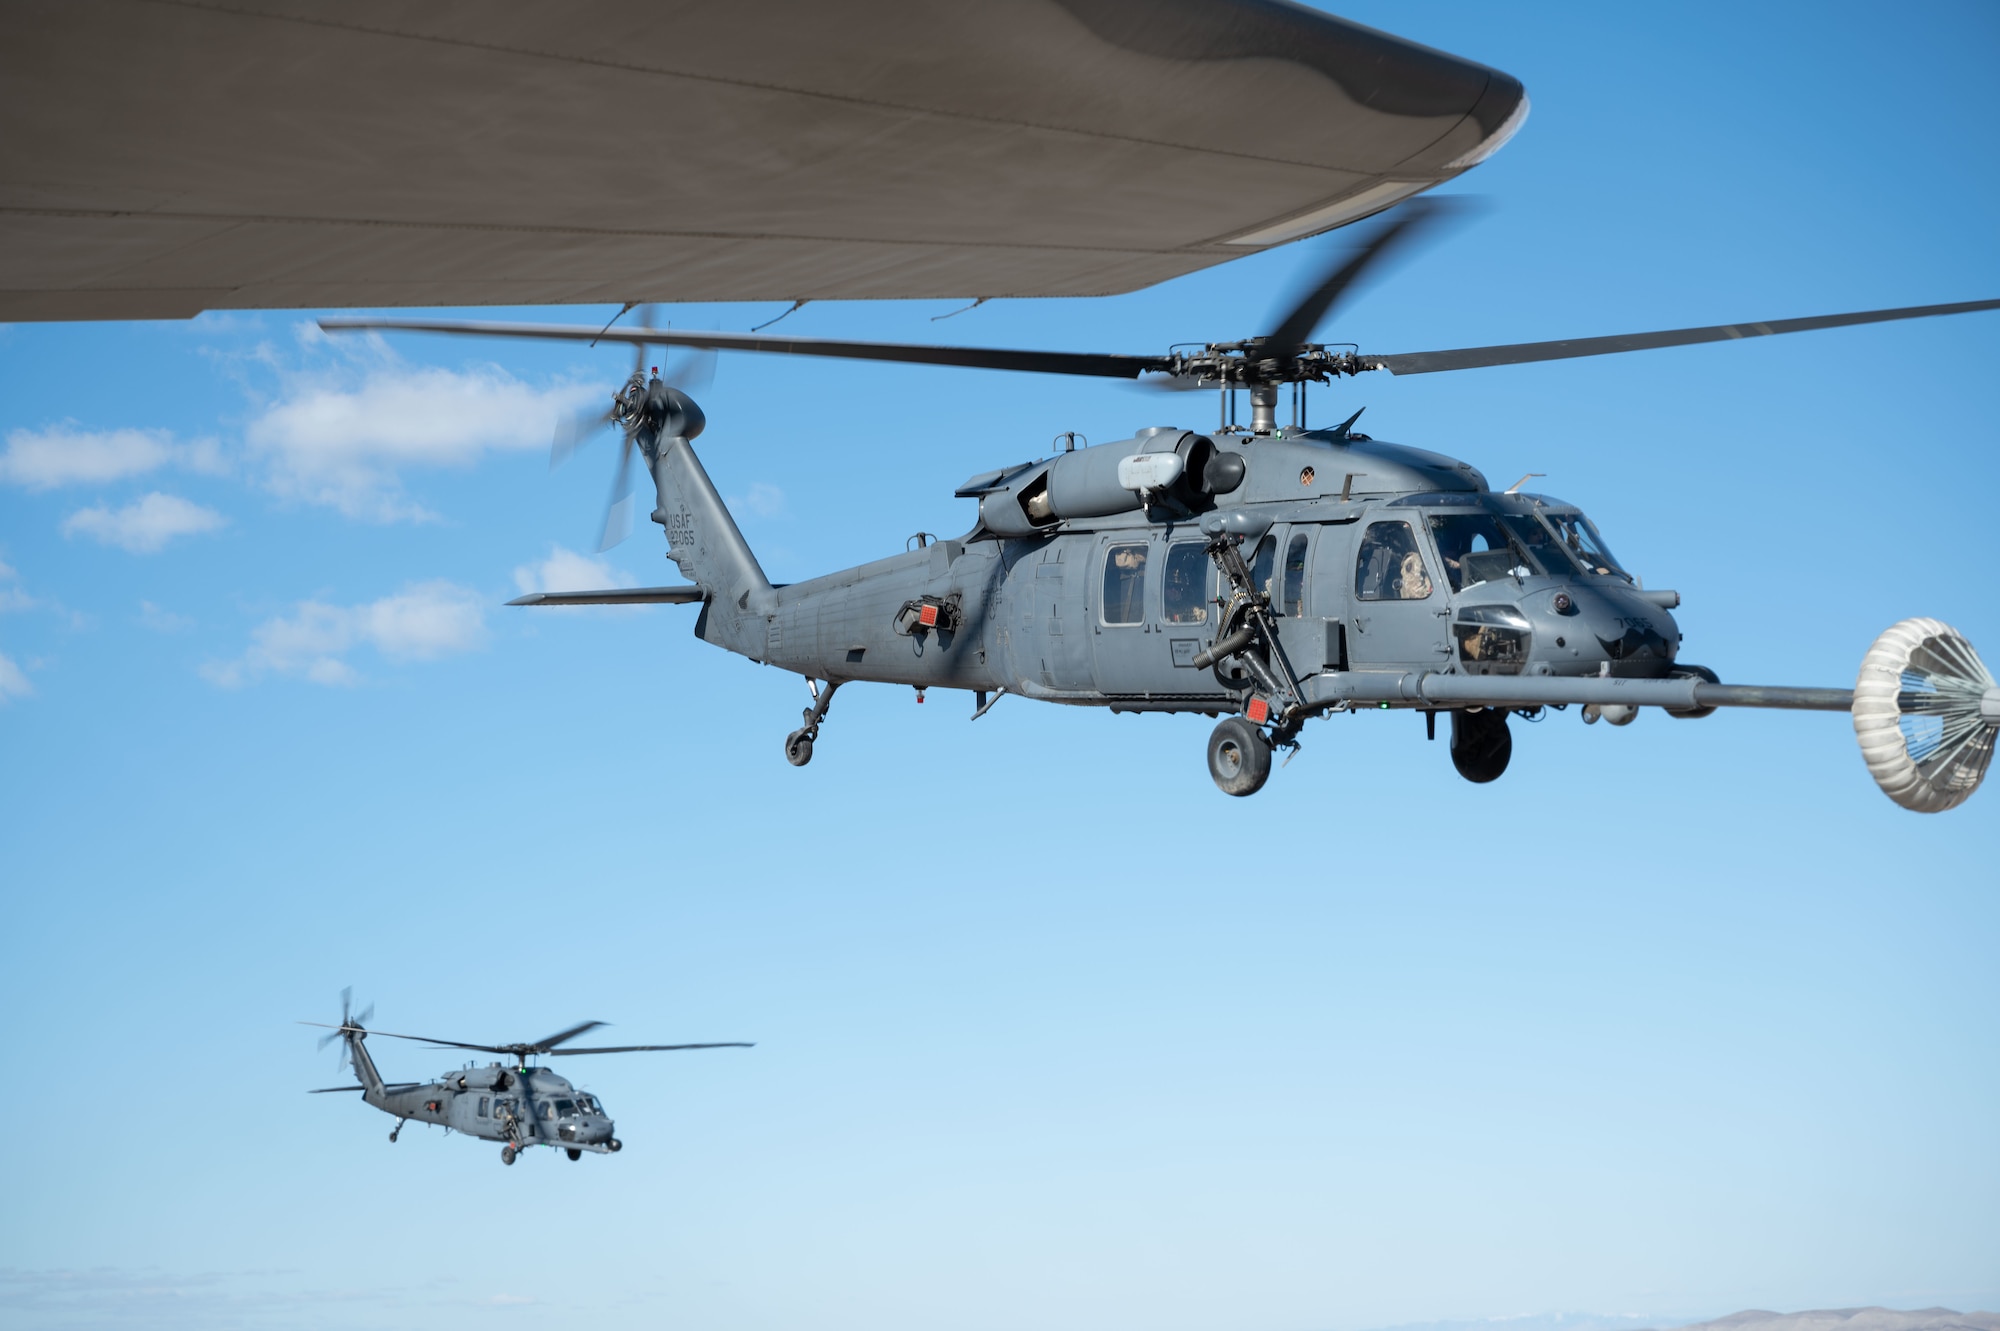 Two HH-60G Pave Hawks engage in midair refueling operations during Red Flag-Nellis 23-2 at Nellis Air Force Base, Nevada, March 16, 2023.